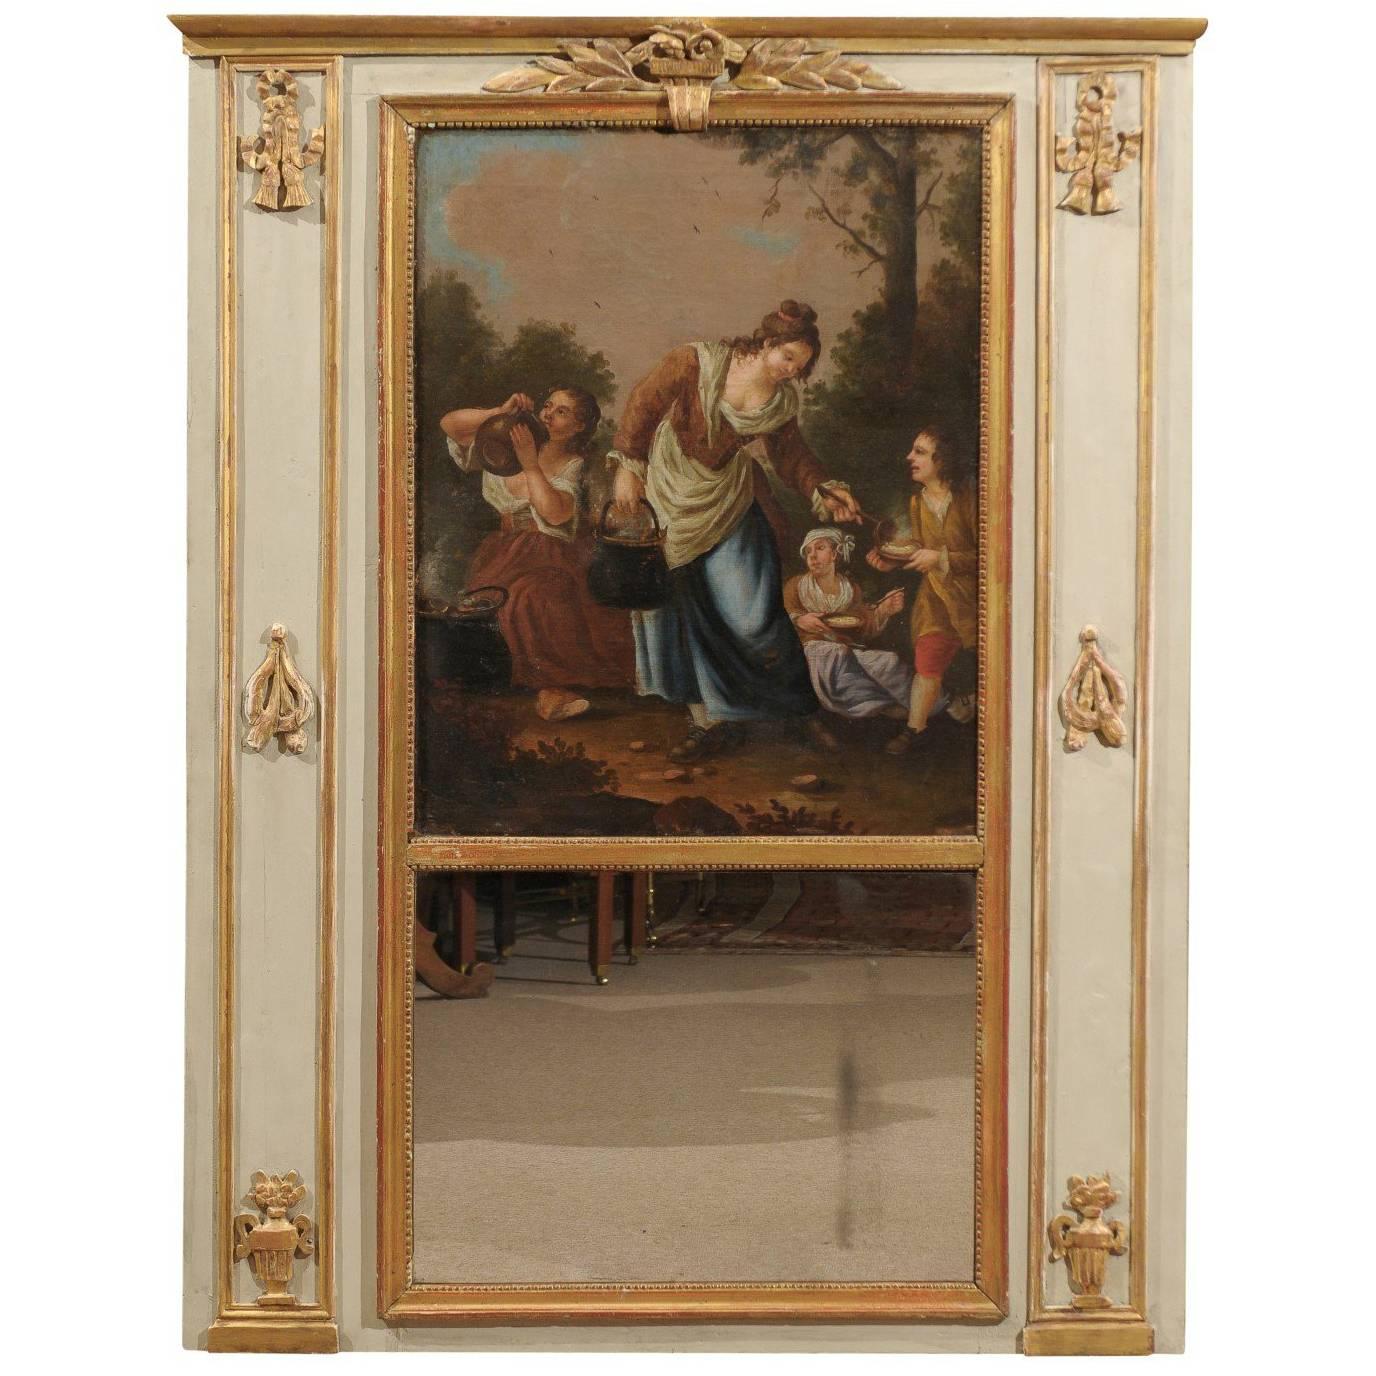 Louis XVI Period Trumeau Mirror with Pastoral Oil on Canvas, France, circa 1780